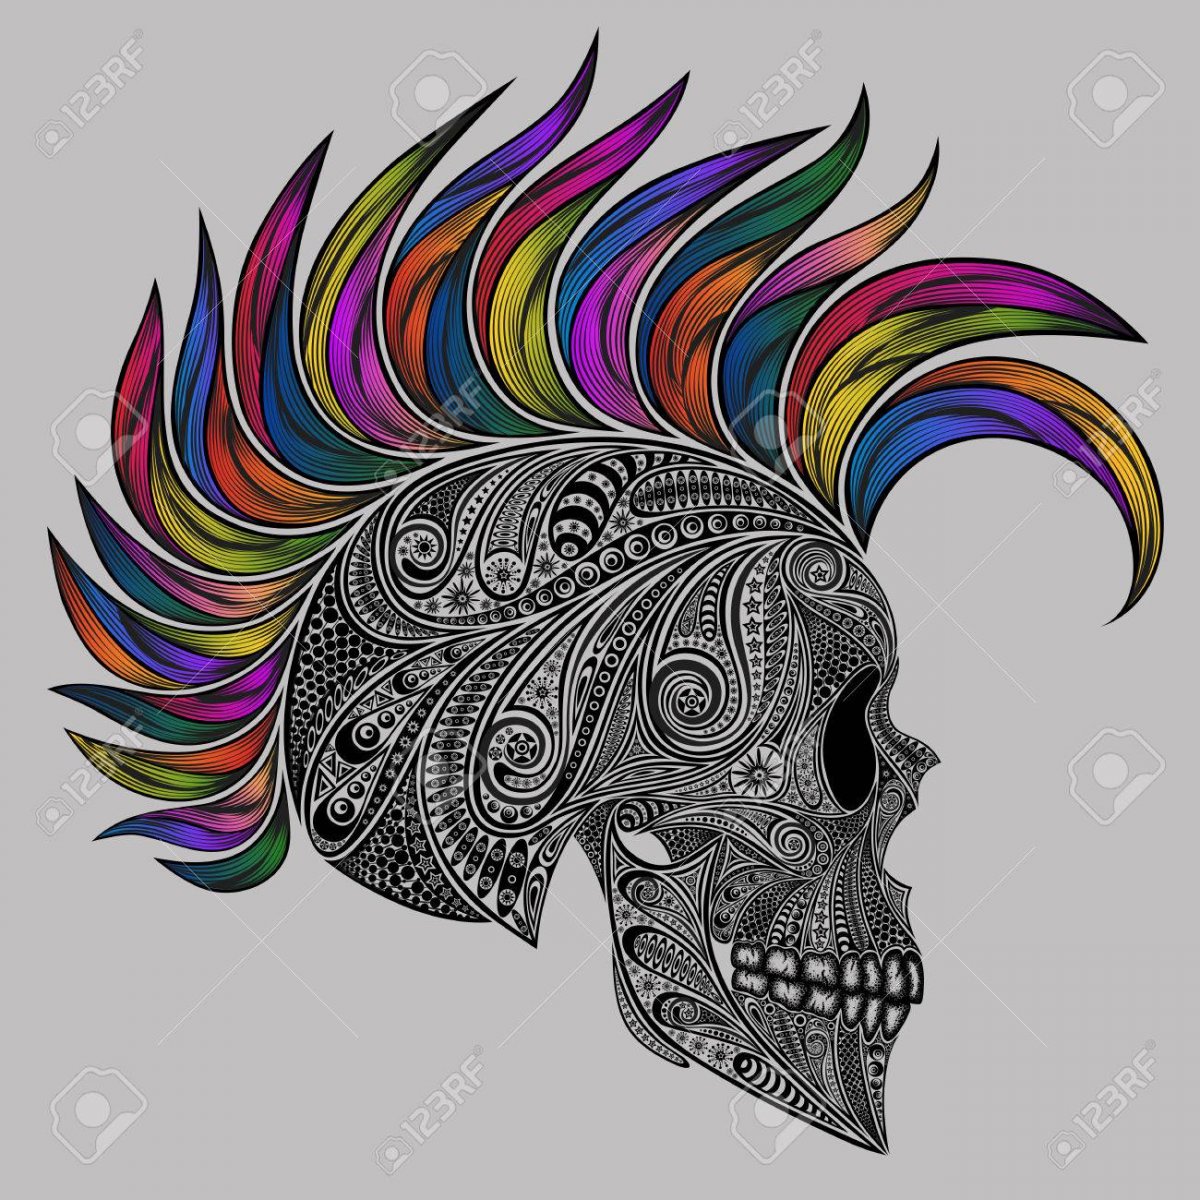 64641348-the-skull-of-punk-vector-human-skull-made-of-flowers-and-colored-mohawk.jpg